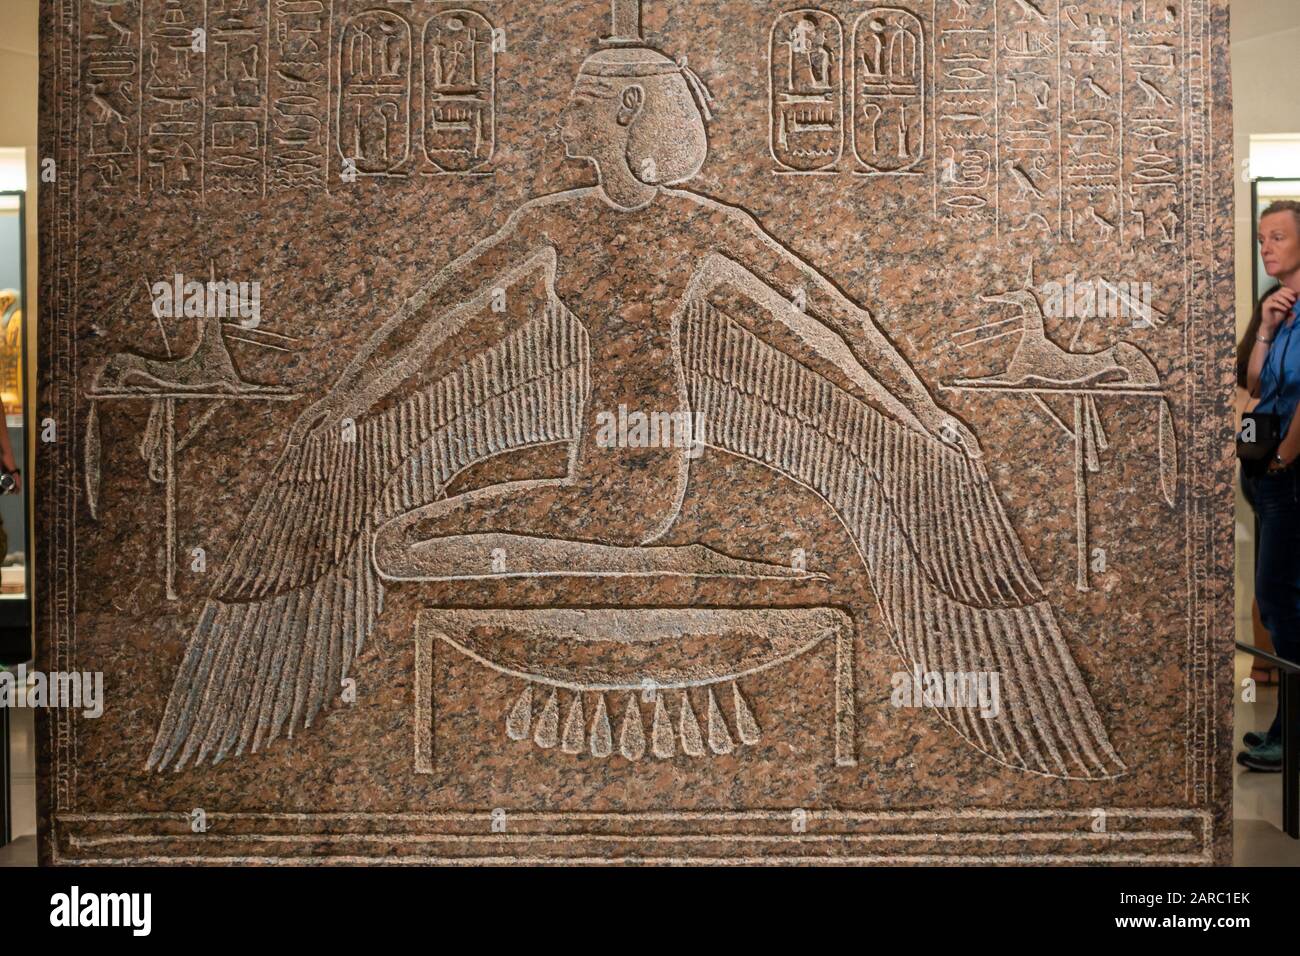 Goddess Isis detail from the red granite sarcophagus of Ramesses III in the Sully Wing of the Louvre Museum (Musée du Louvre) in Paris, France Stock Photo